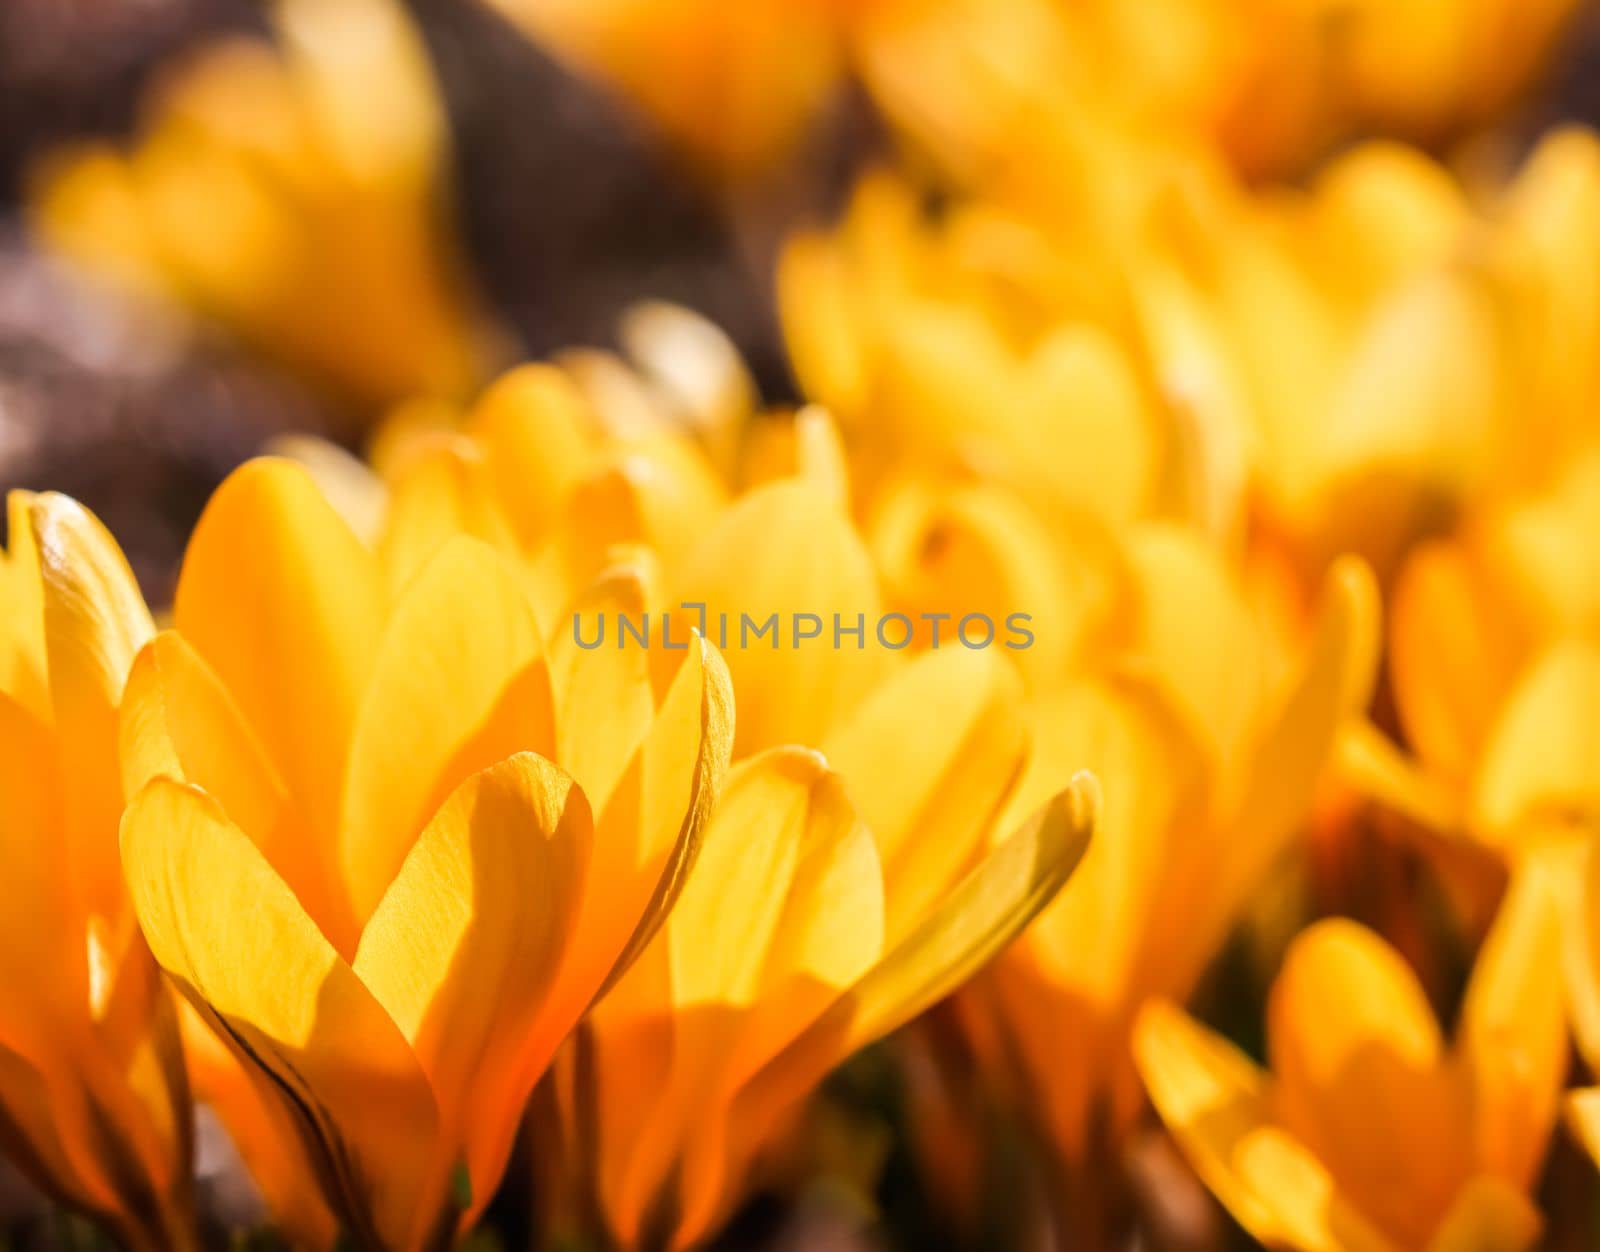 Abstract floral background, yellow crocus flower petals. Macro flowers backdrop for holiday brand design